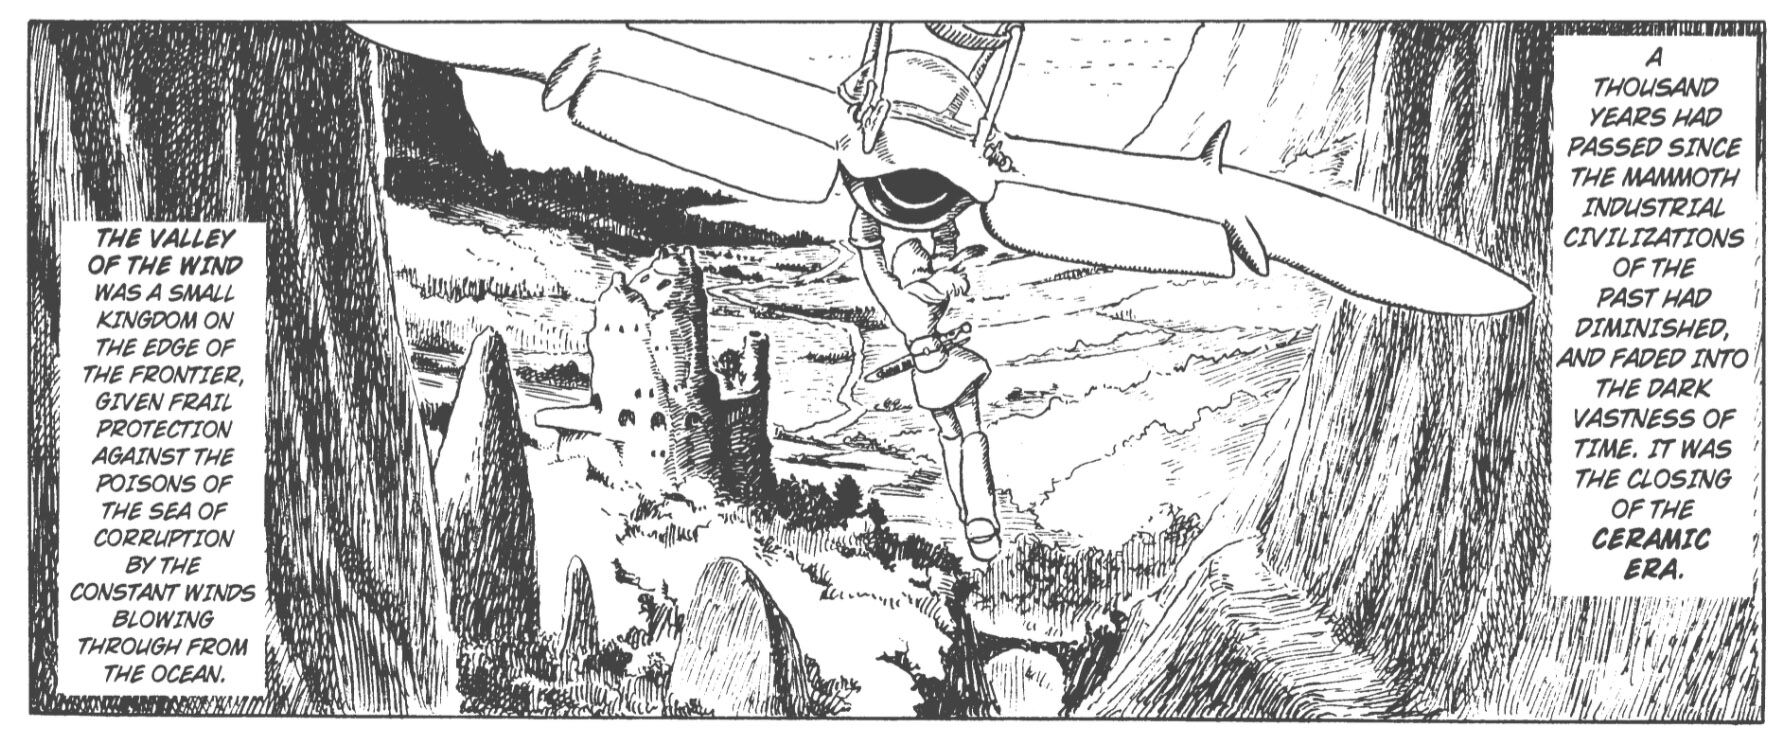 Nausicaä of the Valley of the Wind (Manga) - TV Tropes